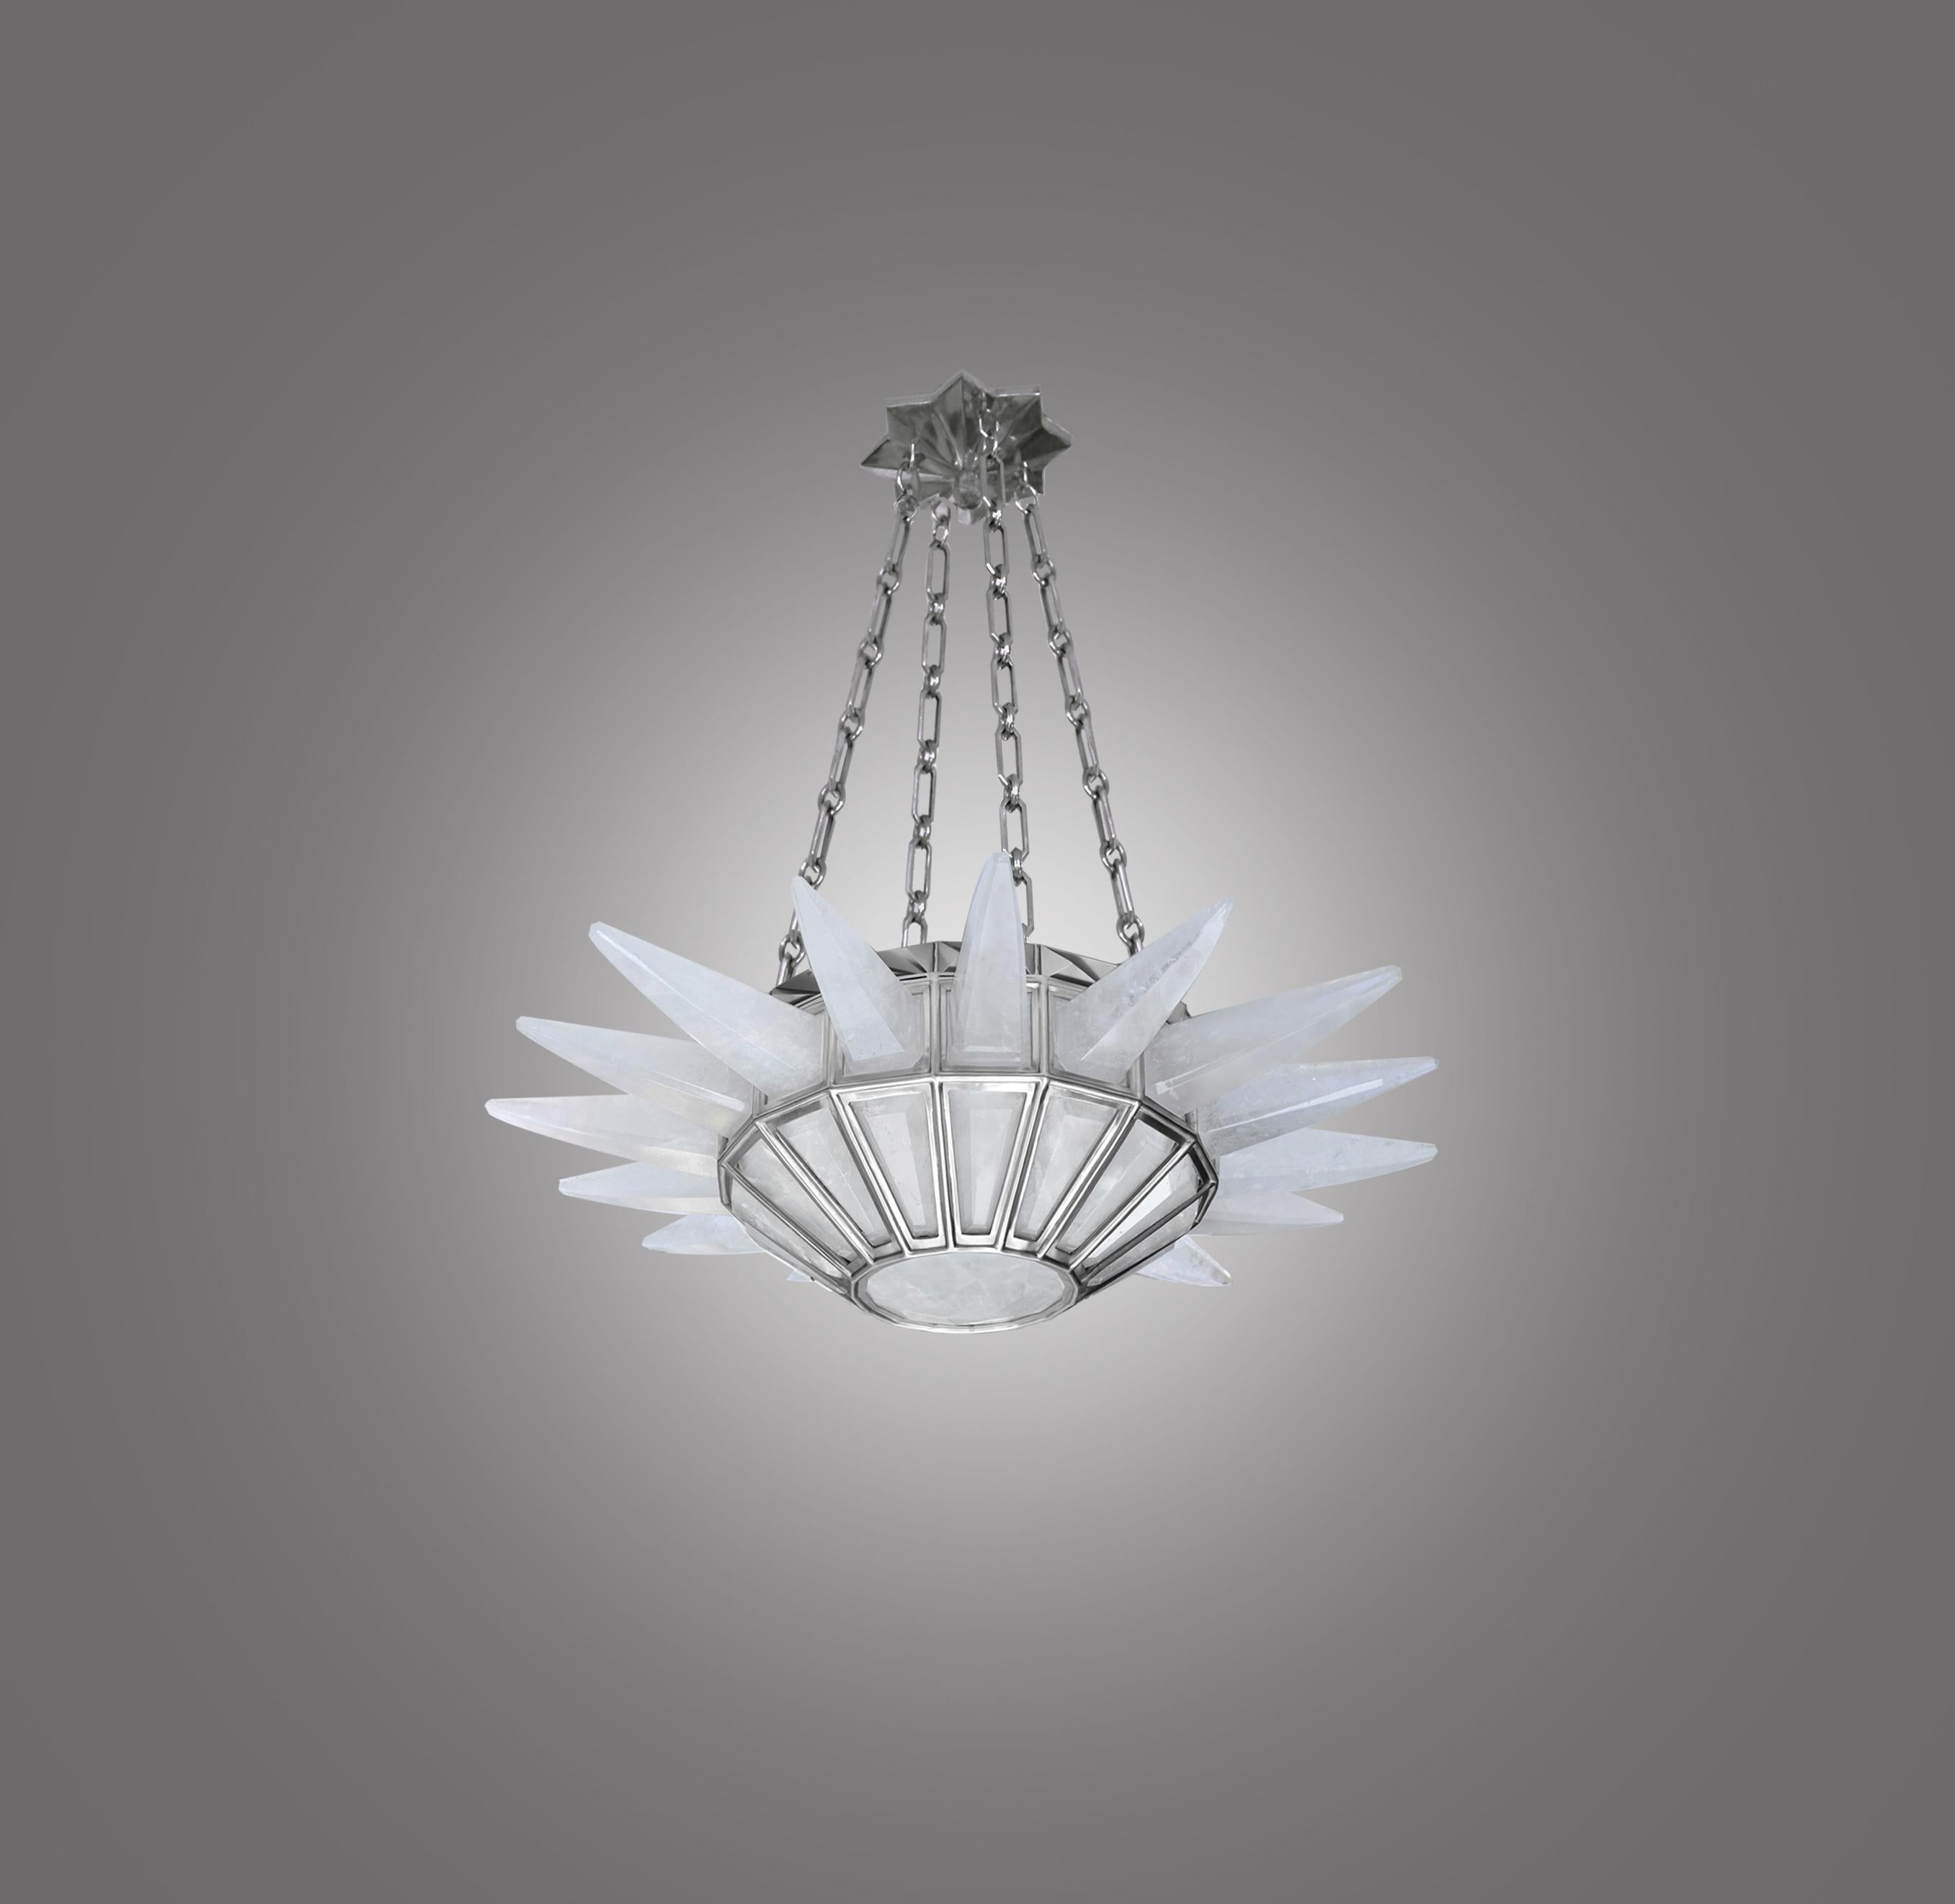 A fine carved contemporary rock crystal quartz chandelier with 16 spikes, matte nickel finished frame. Created by Phoenix Gallery, NYC.
Custom size upon request.